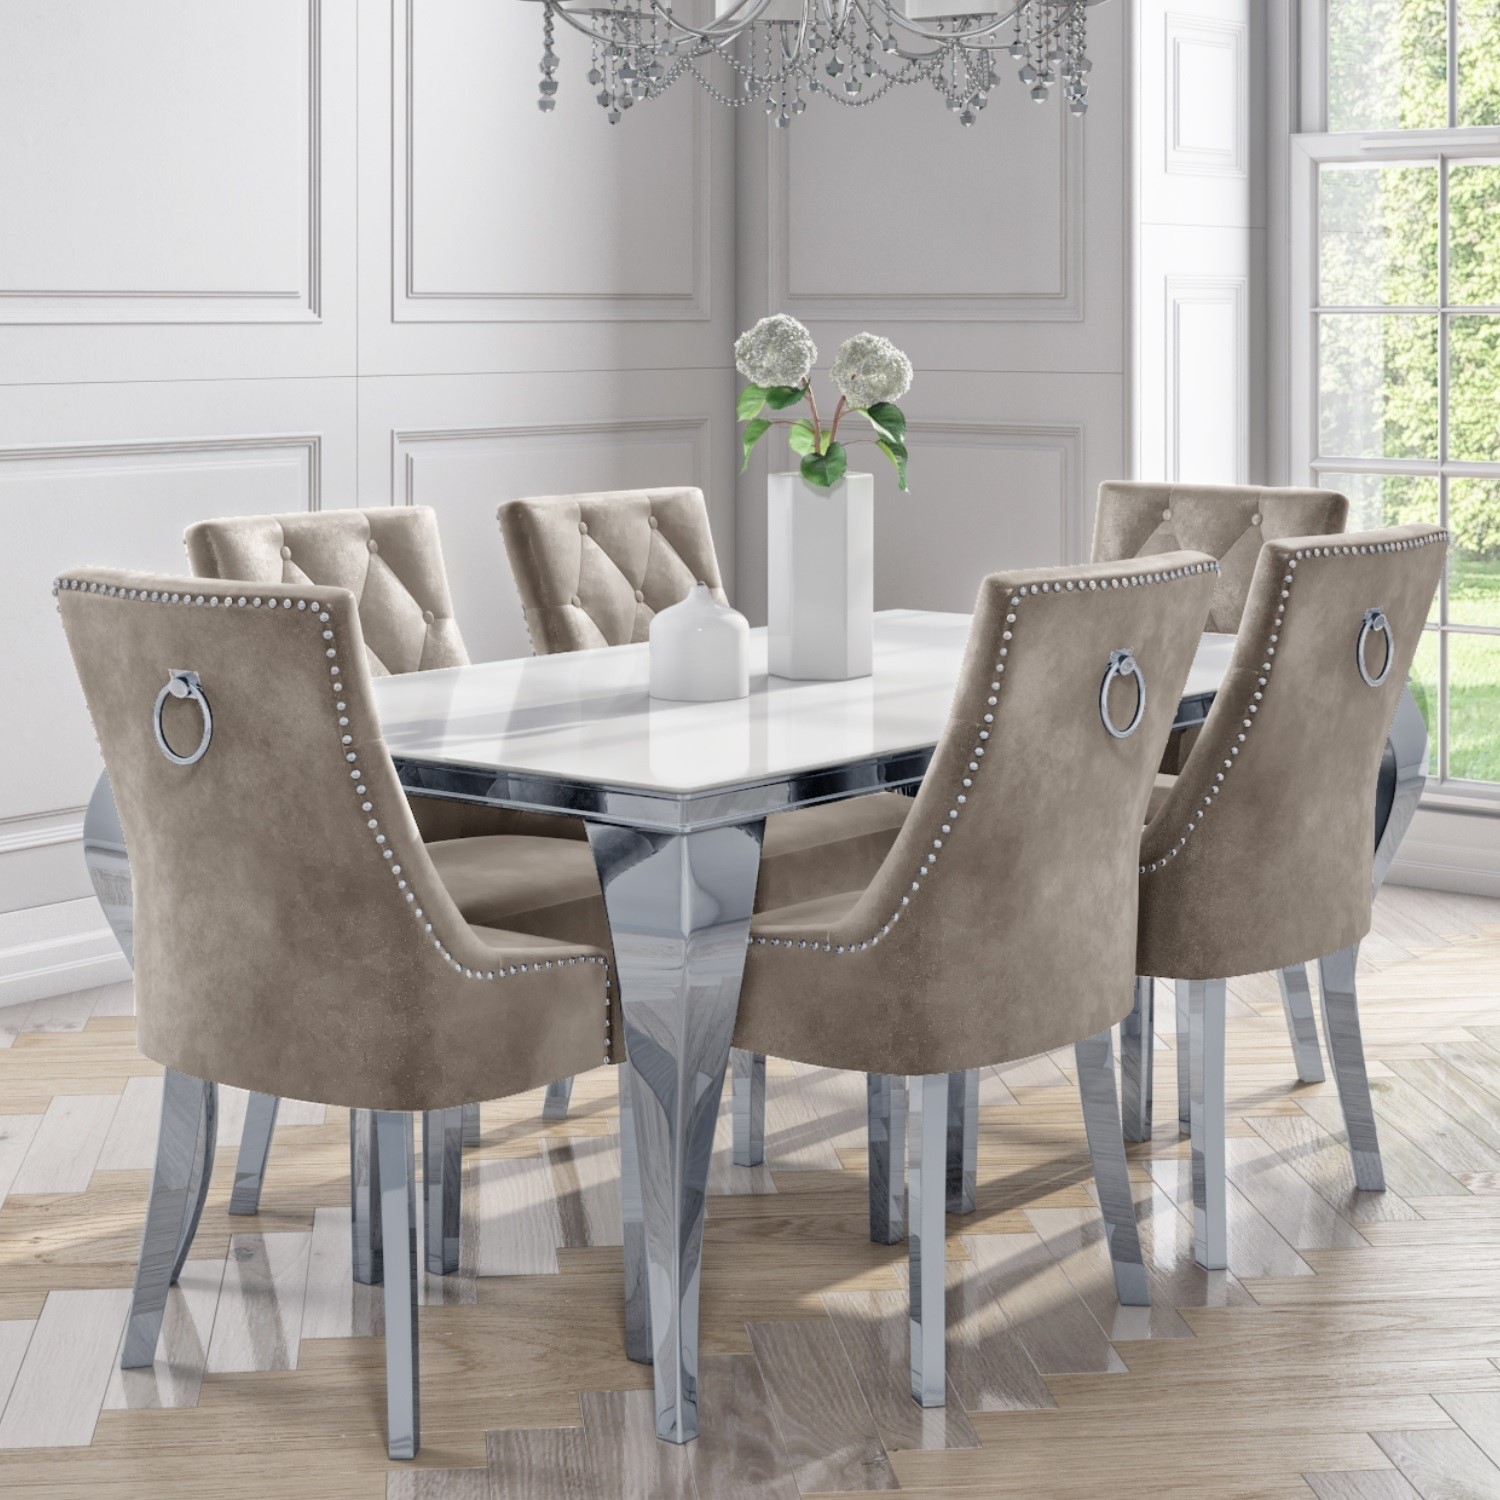 Mirrored Dining Table With 6 Chairs In Mink Jade Boutique Buyitdirectie